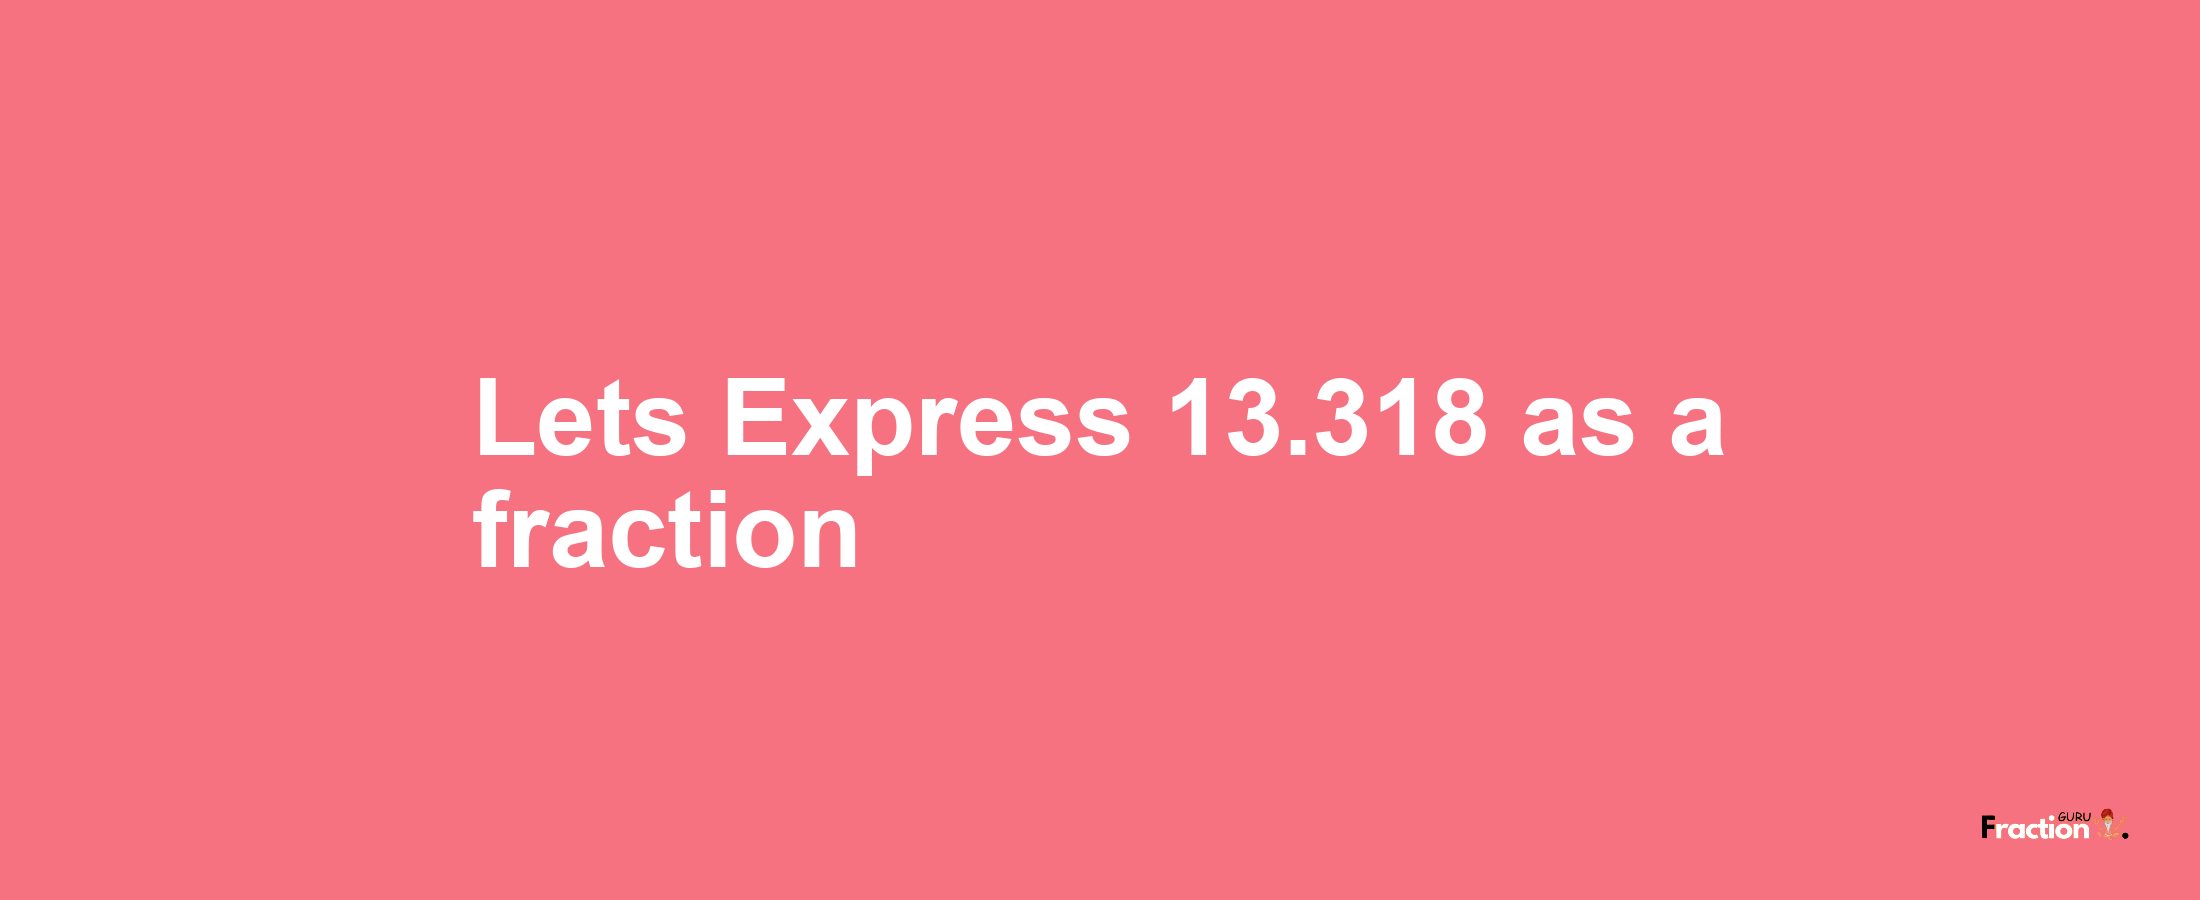 Lets Express 13.318 as afraction